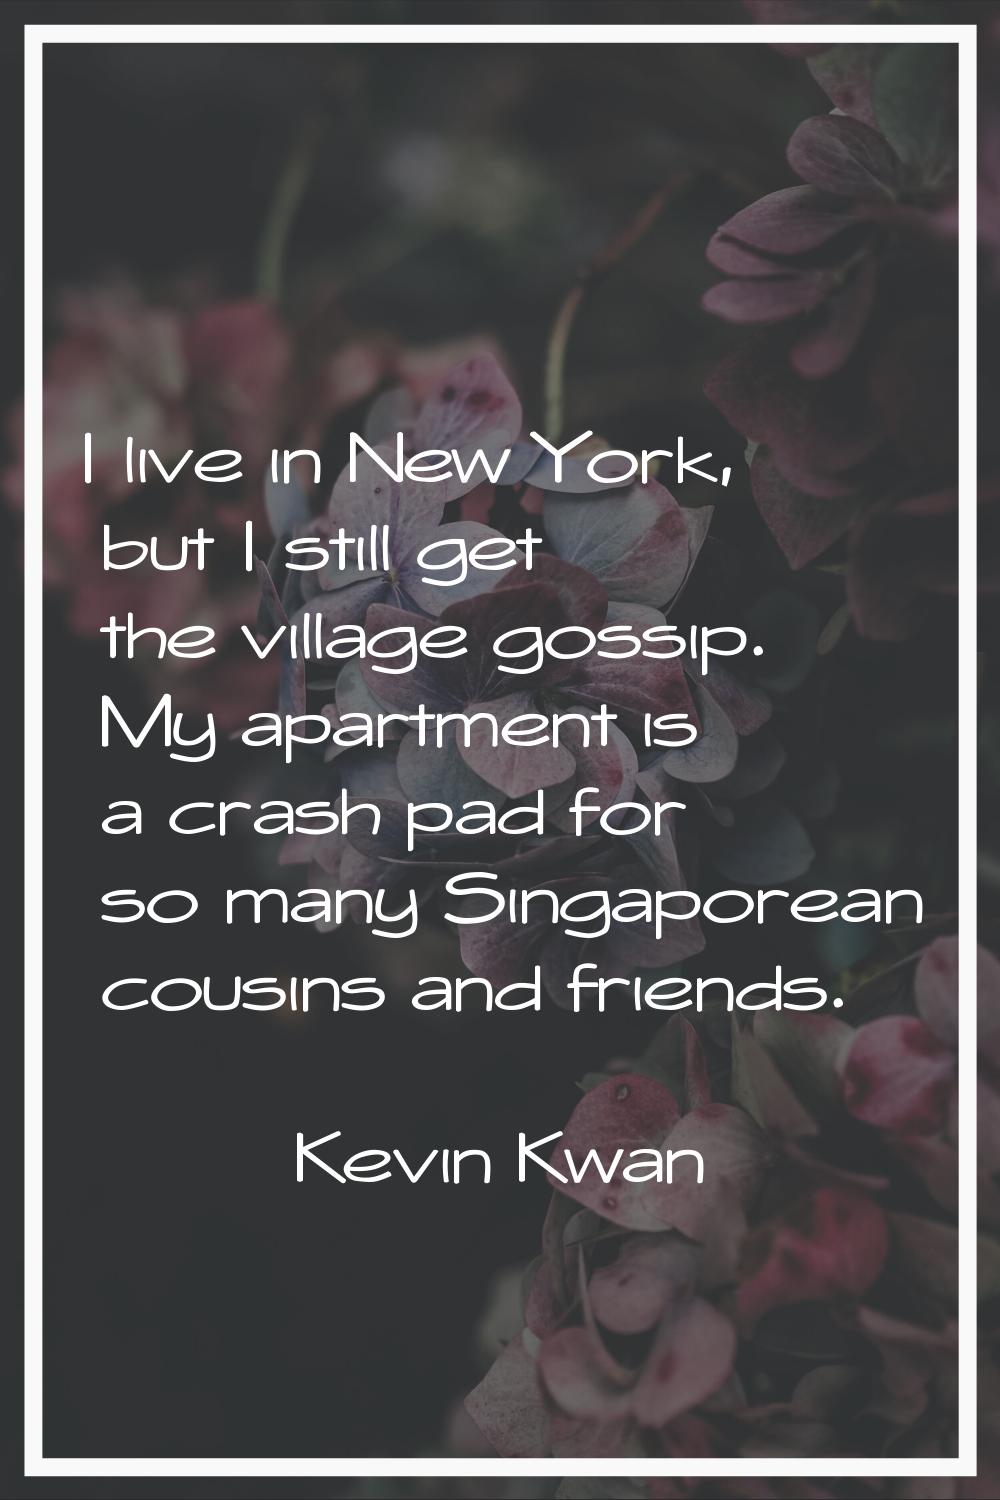 I live in New York, but I still get the village gossip. My apartment is a crash pad for so many Sin